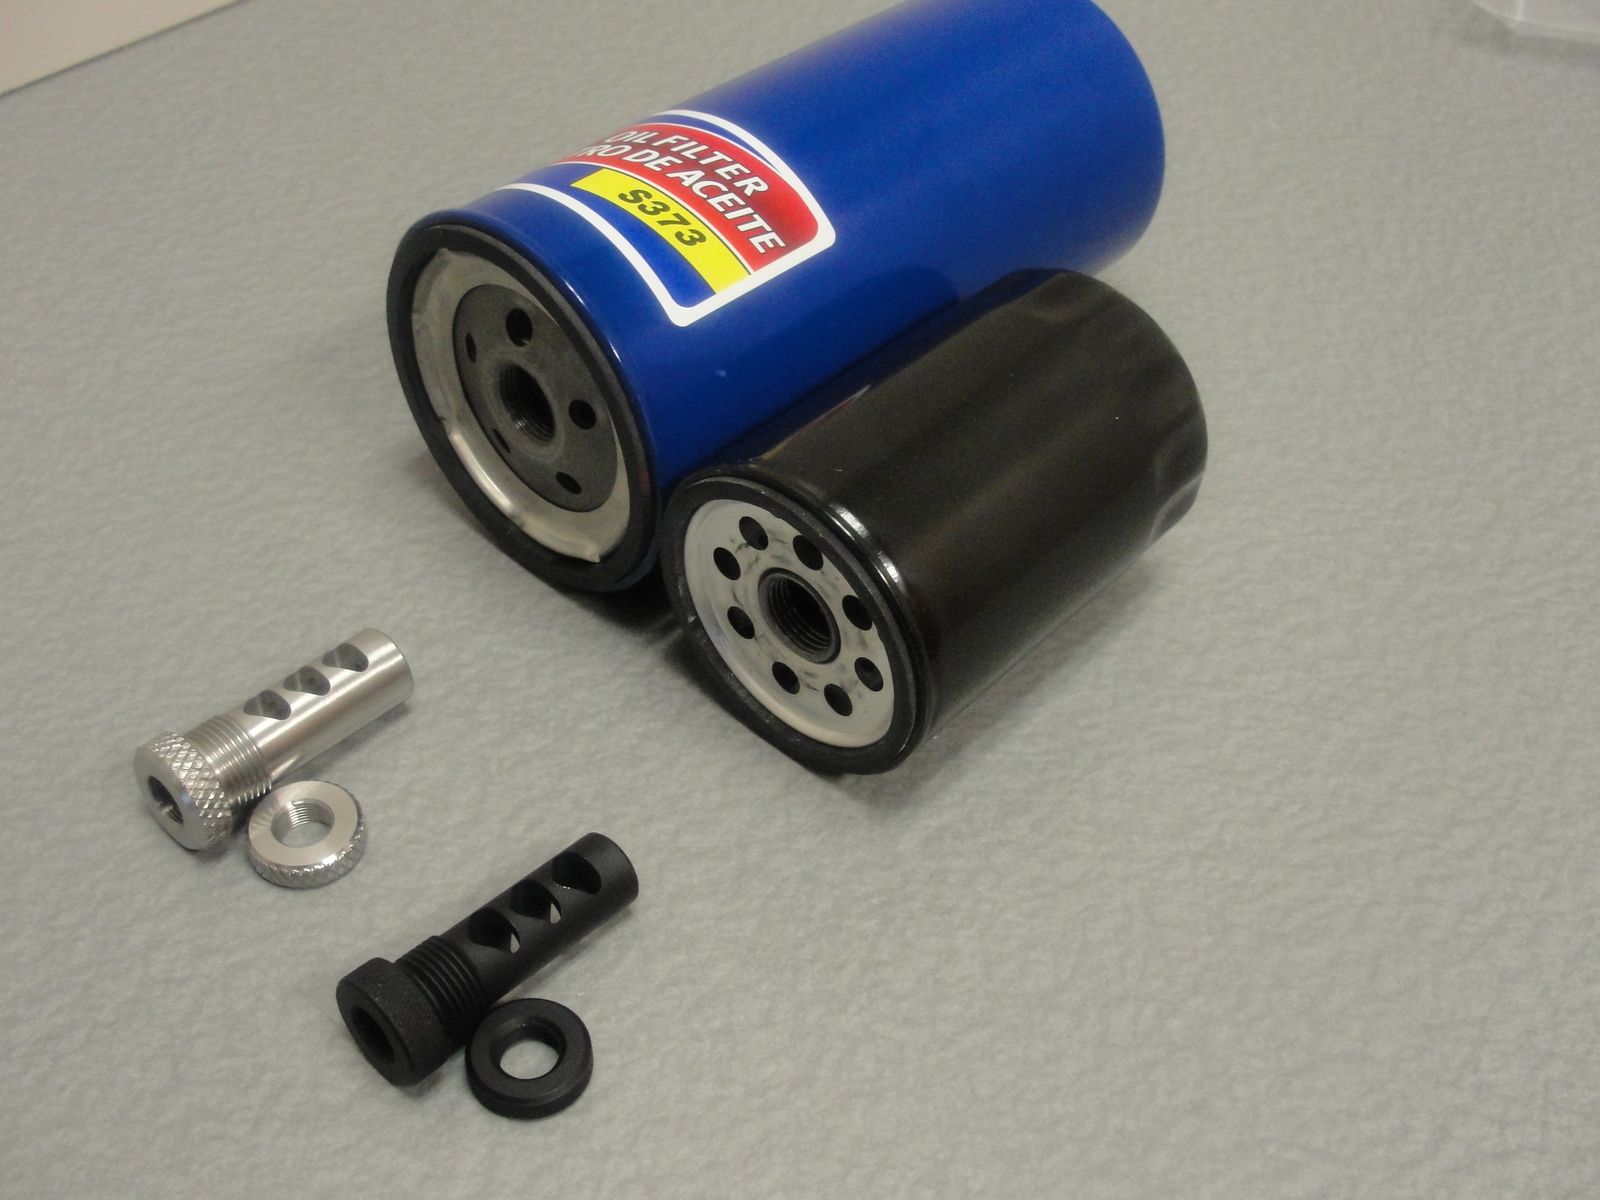 How To Make An Oil Filter Suppressor Adapter